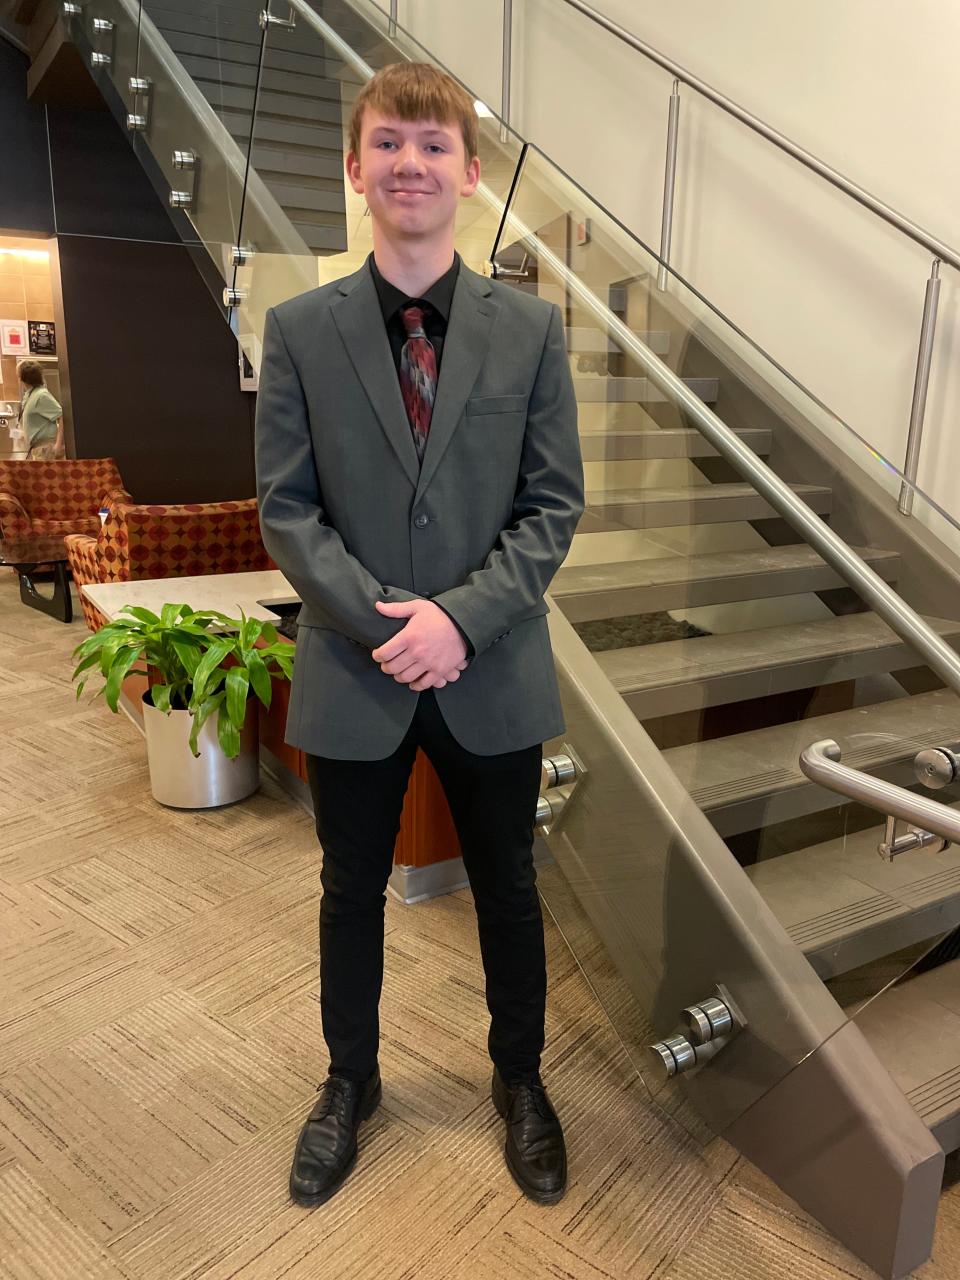 Eighth grader William Webb will be competing at the 2023 Business Professionals of America National Leadership Conference.